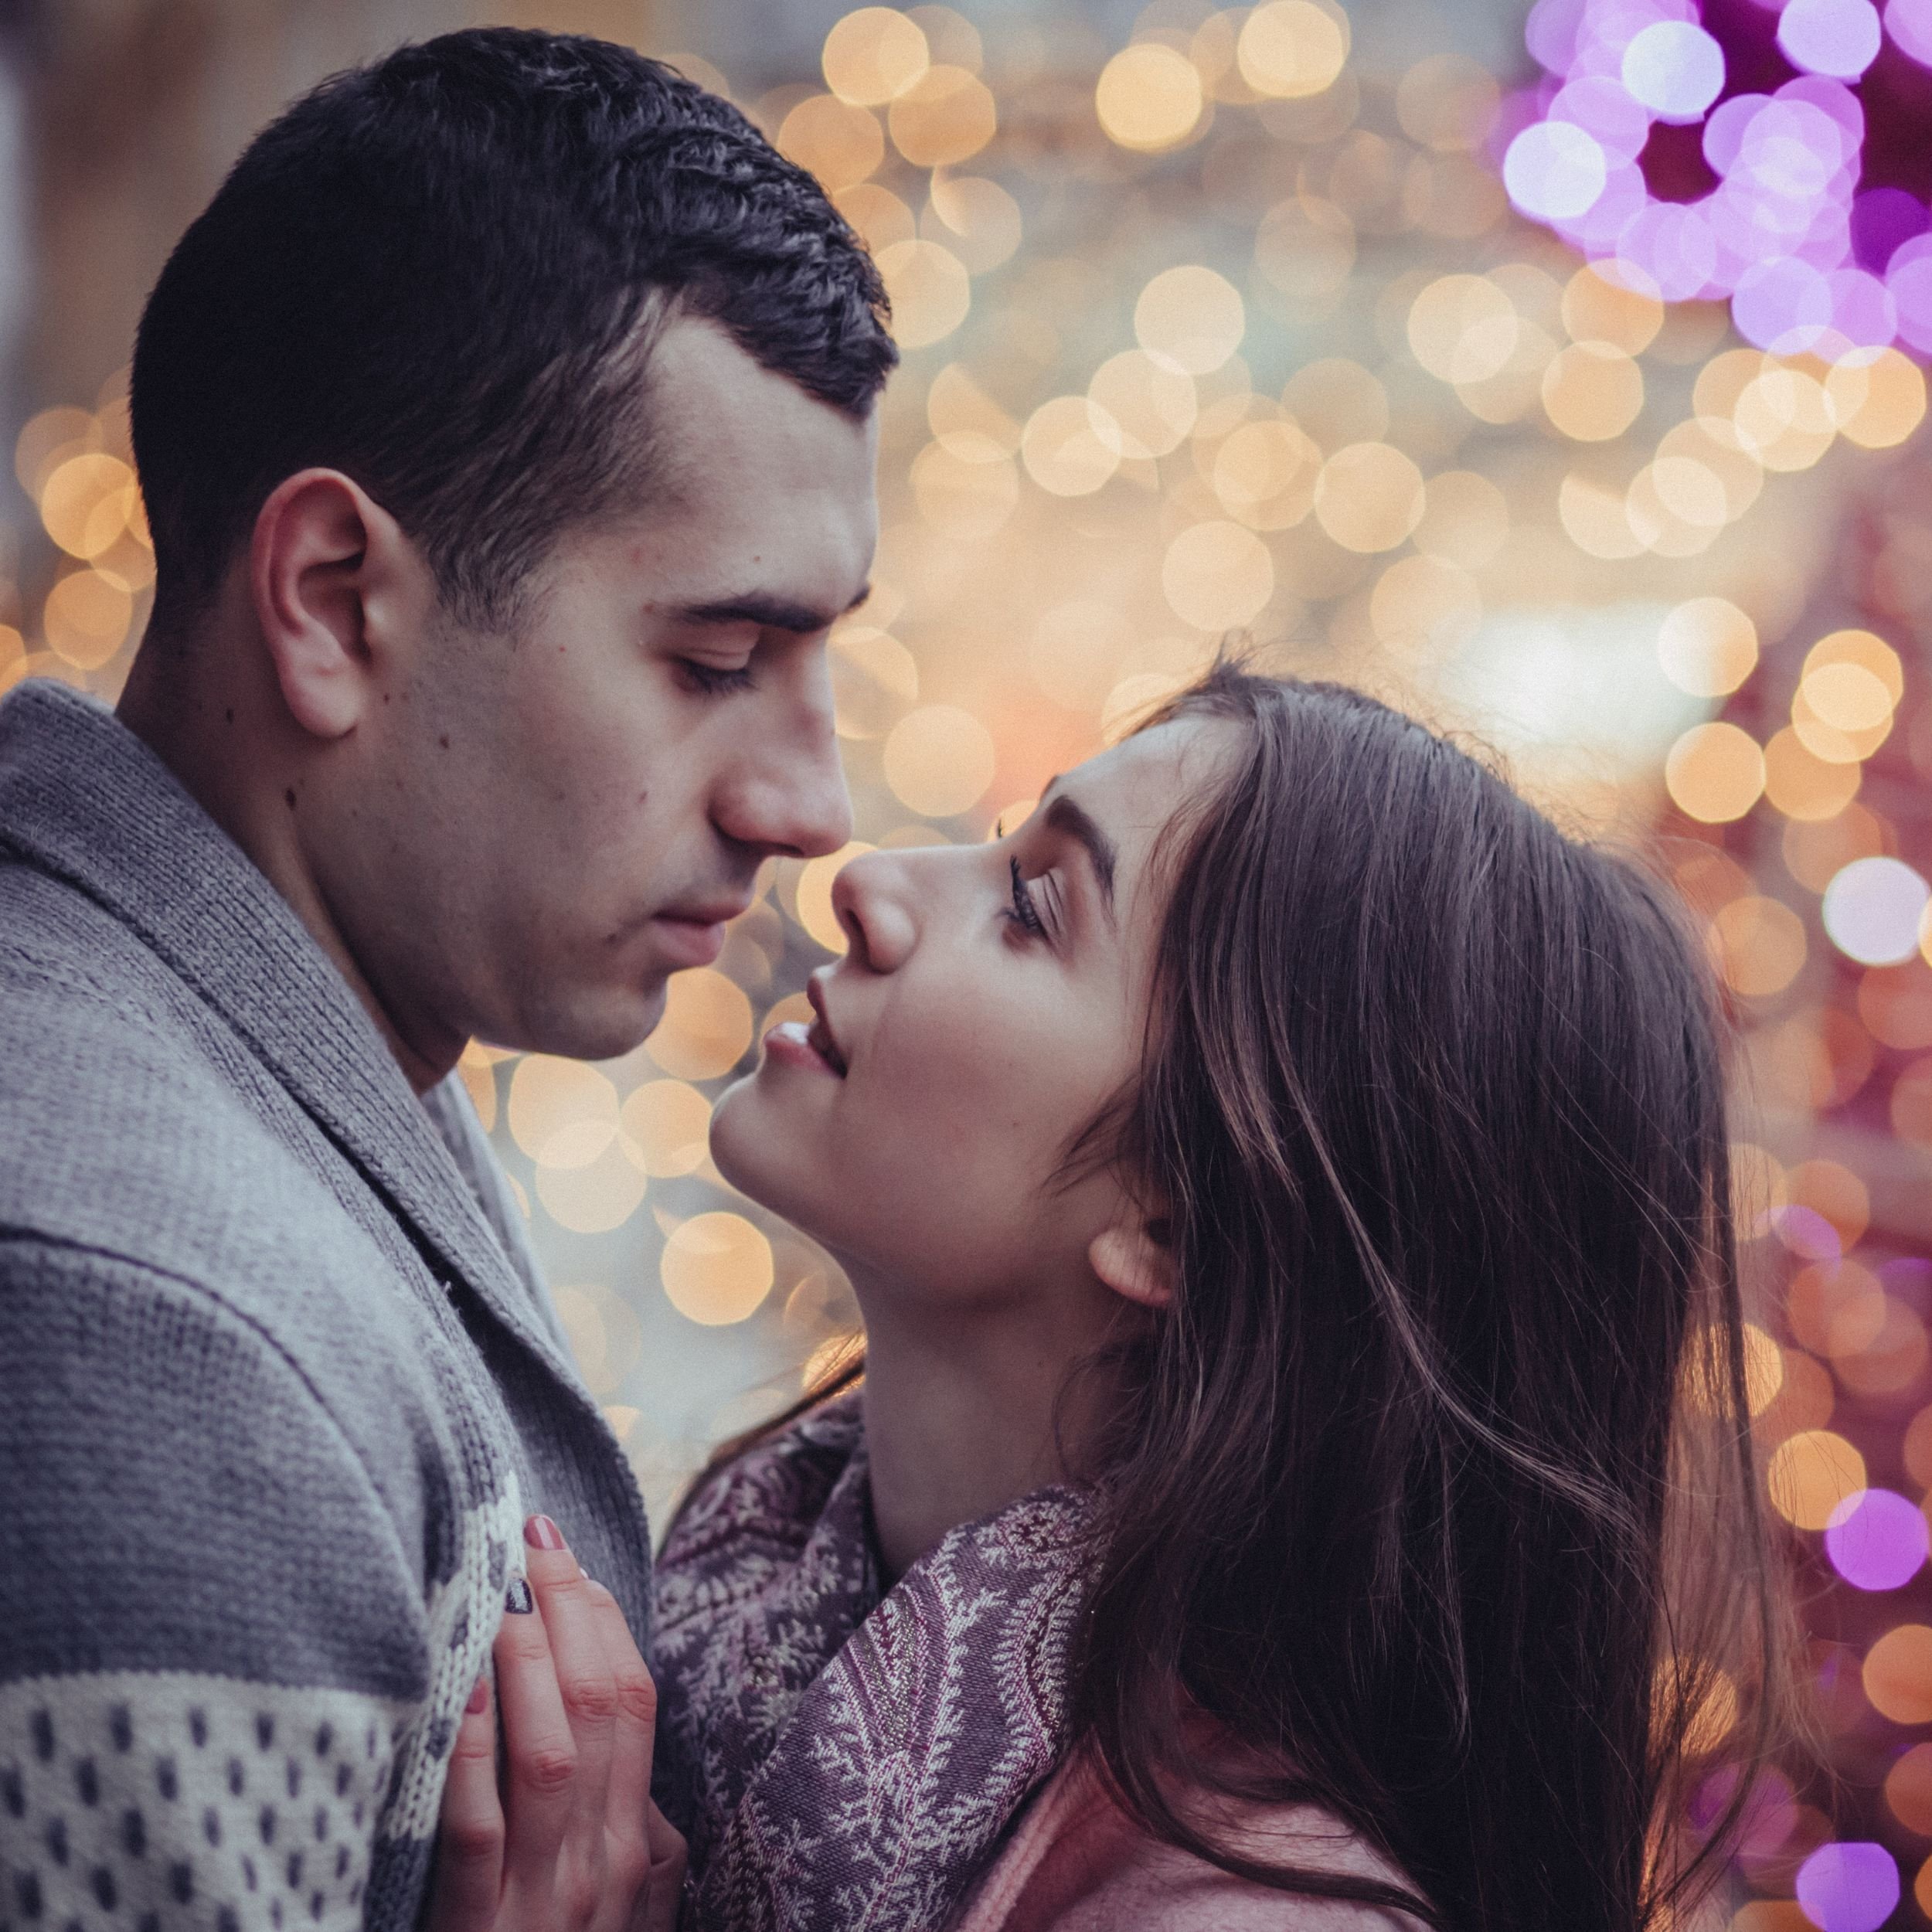 couple looking longingly at one another with twinkly lights in background.jpg